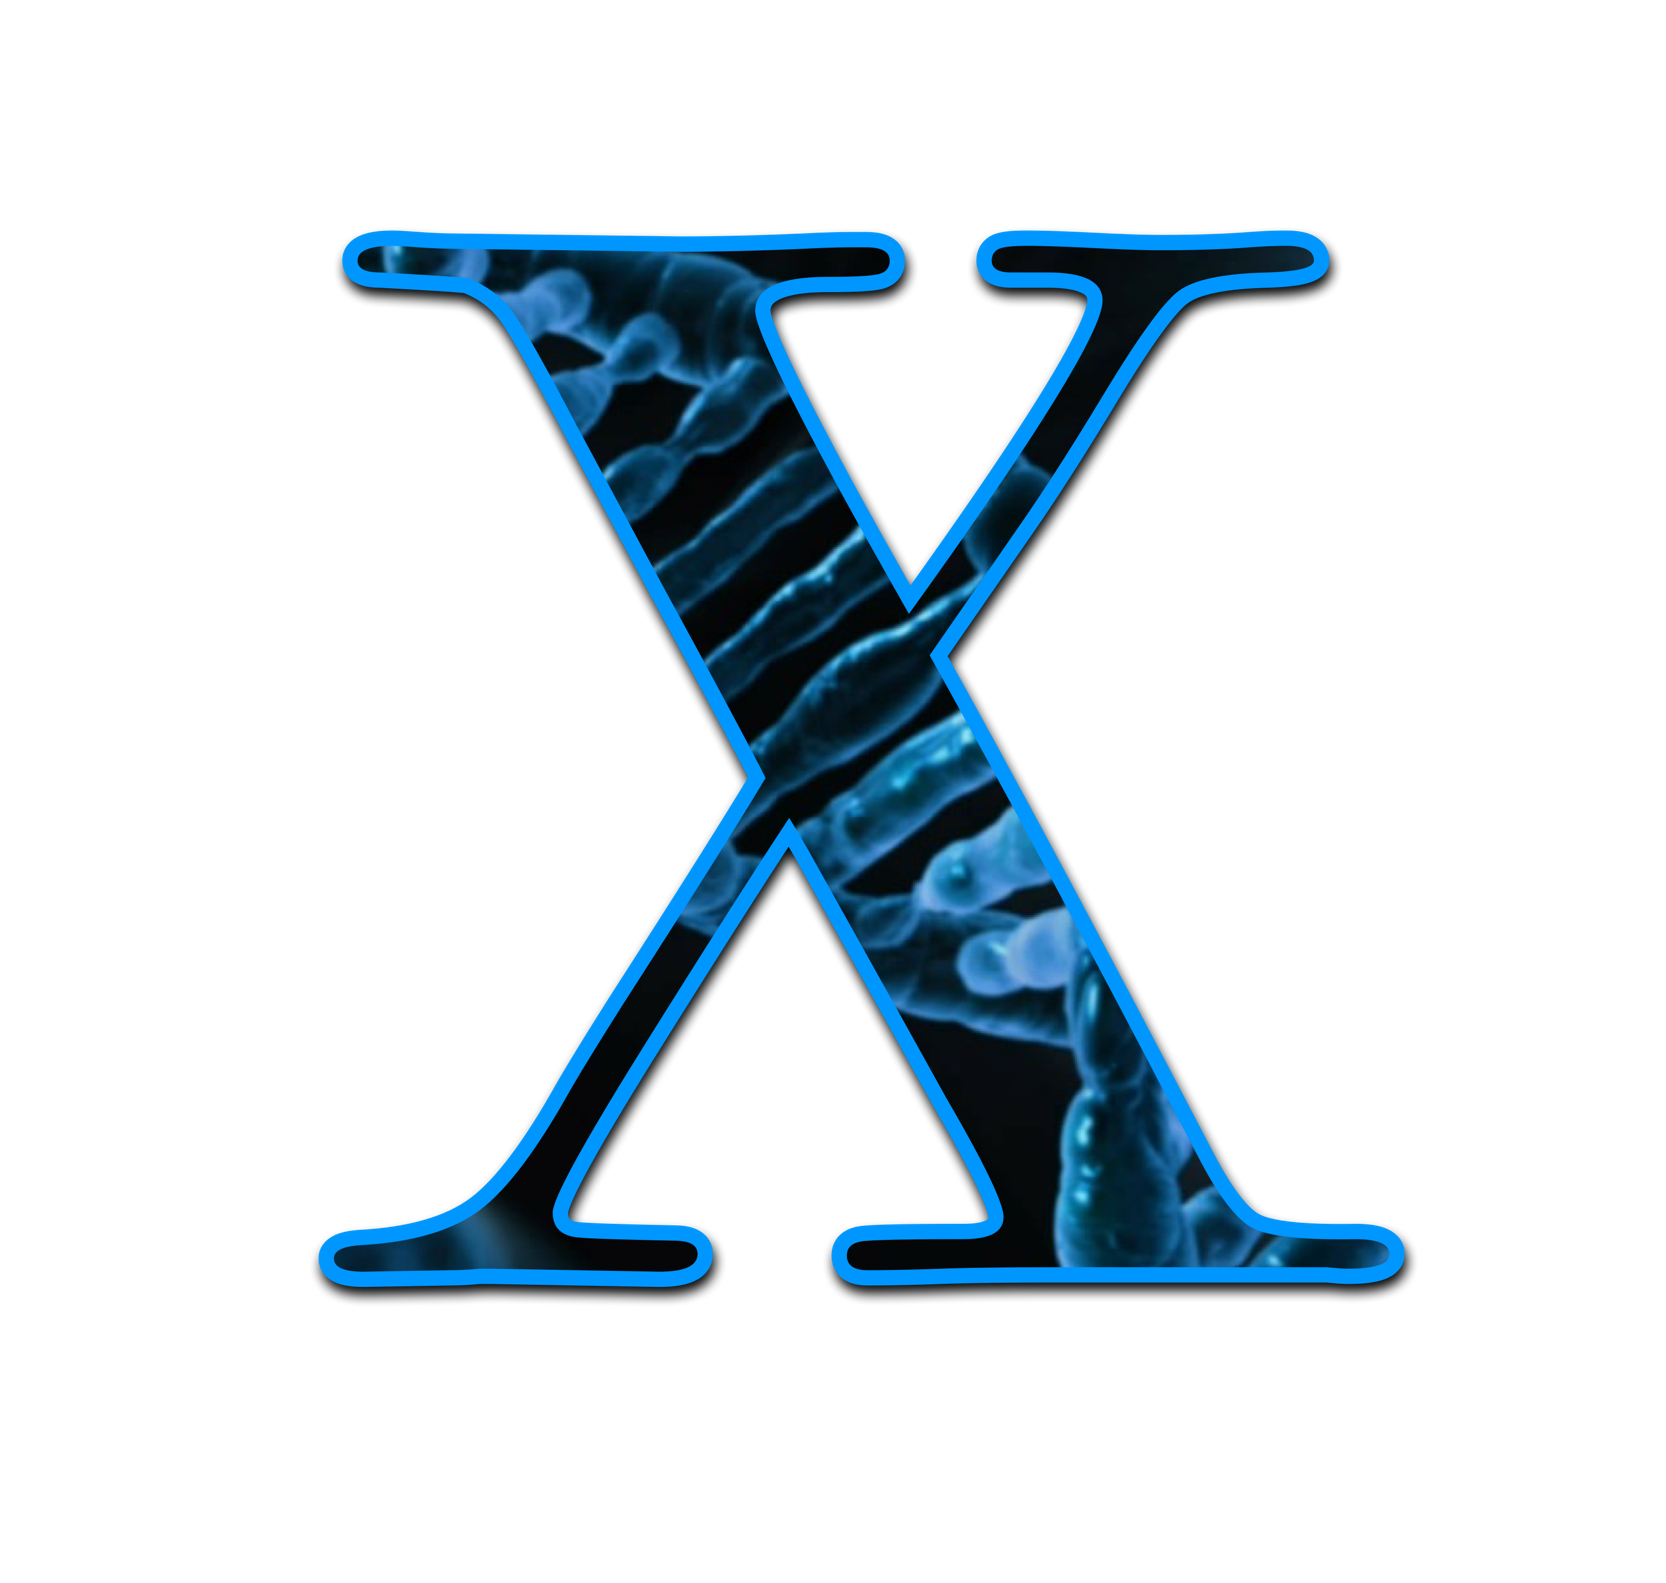 letter x made from image of dna